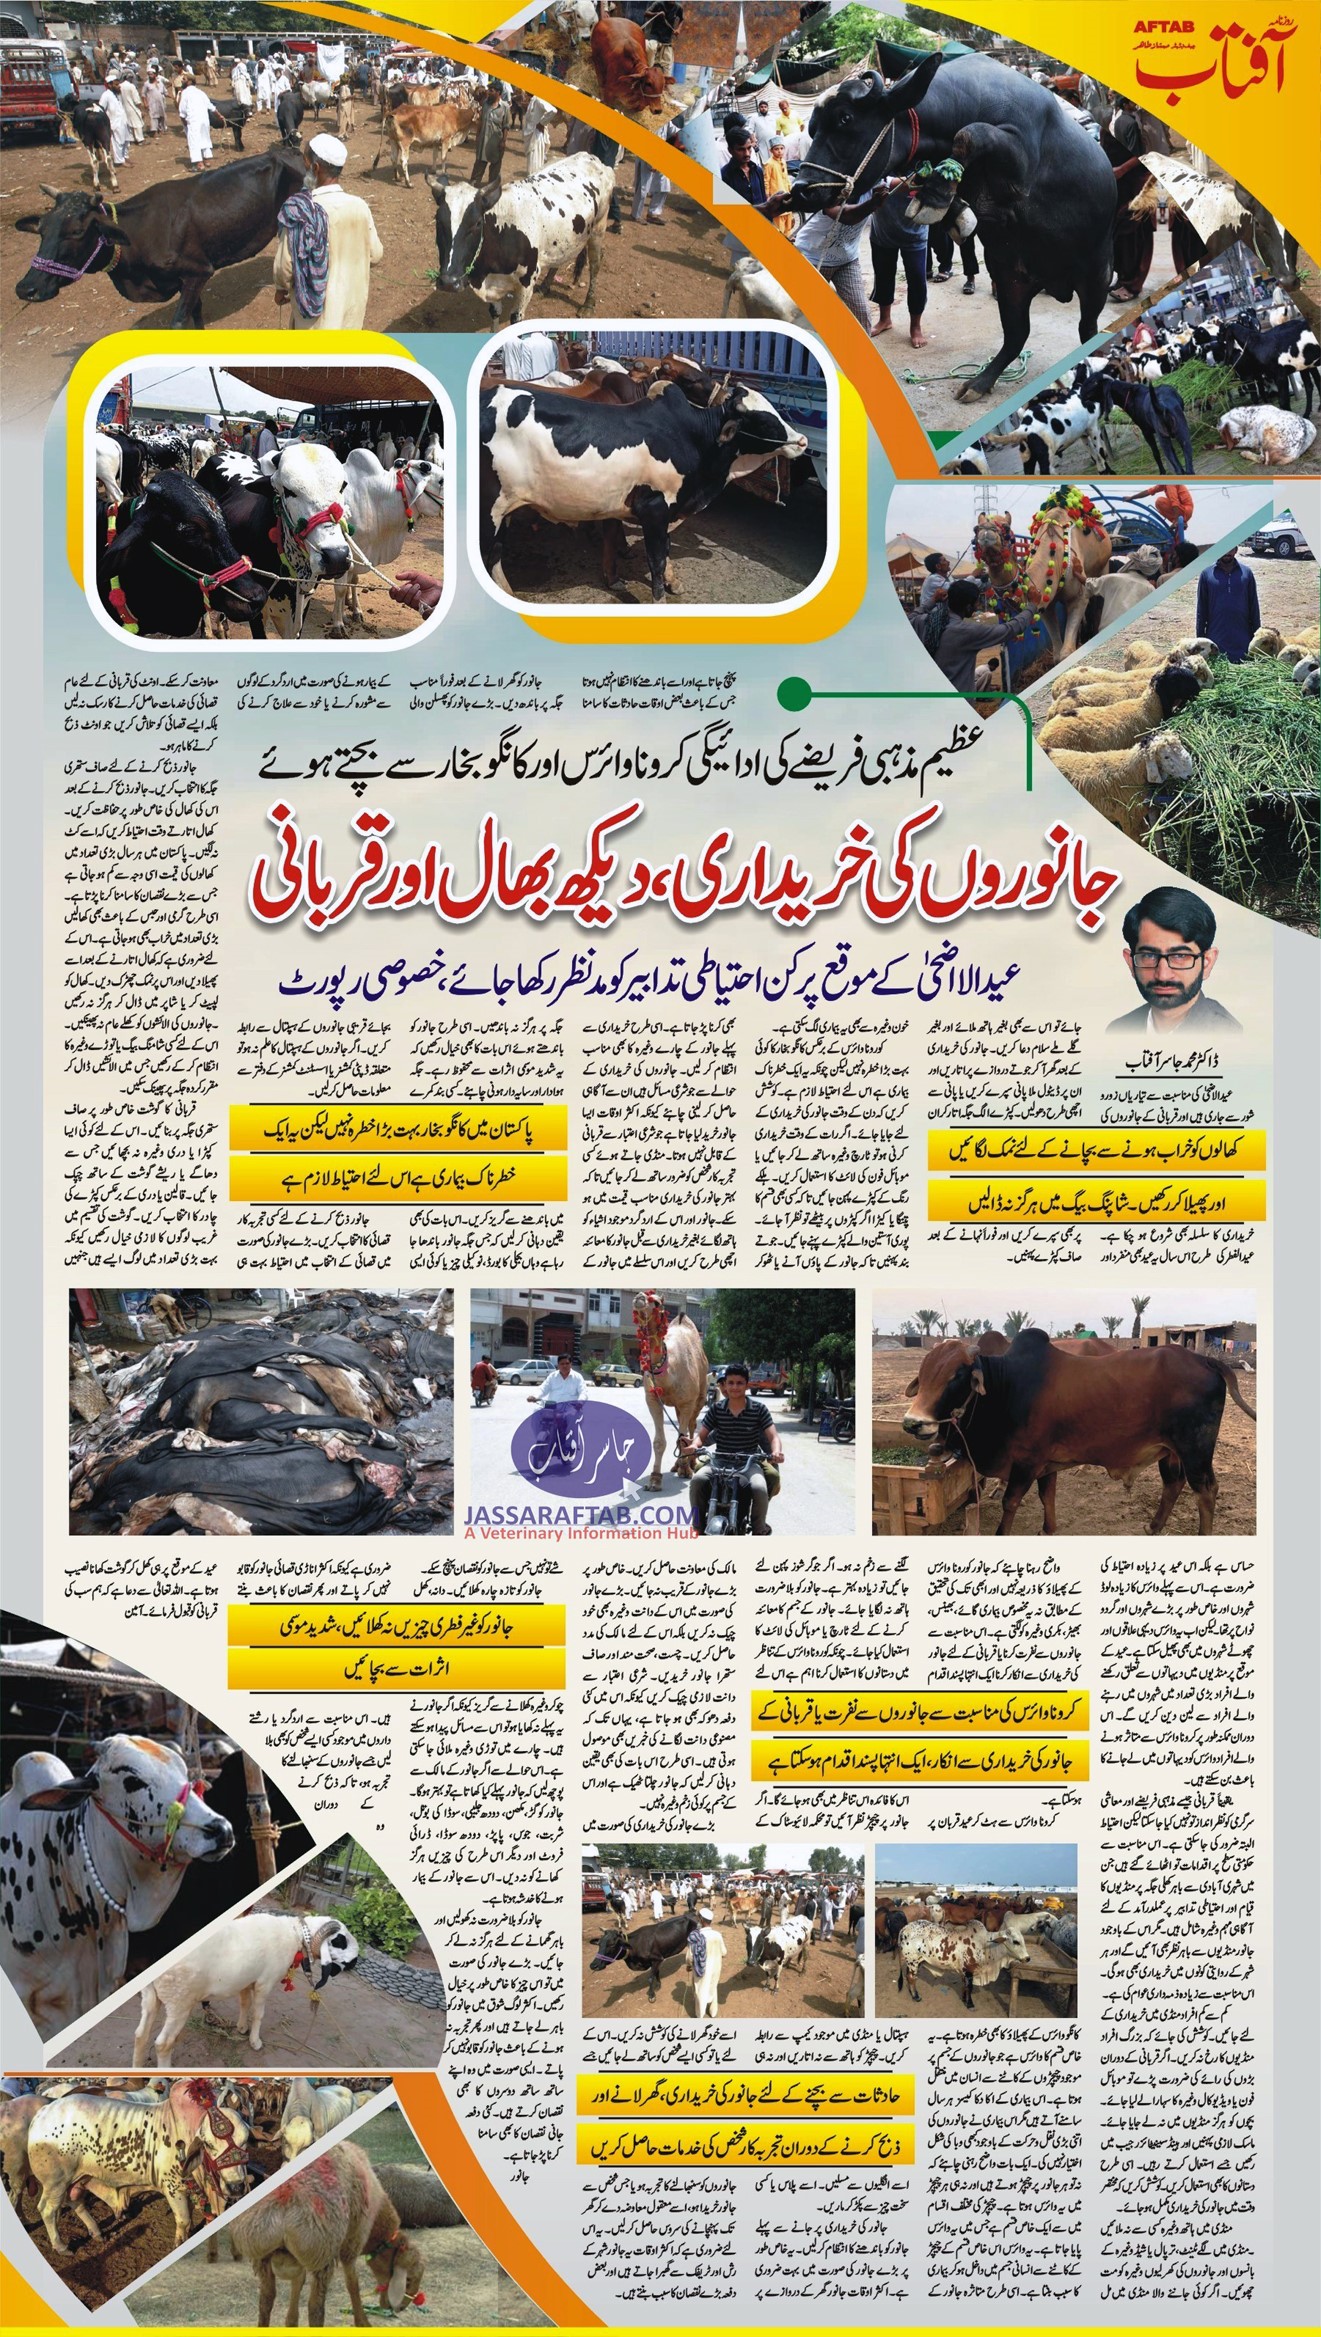 Selection of best animal for qurbani and distribution of qurbani meat or sacrificial meat.